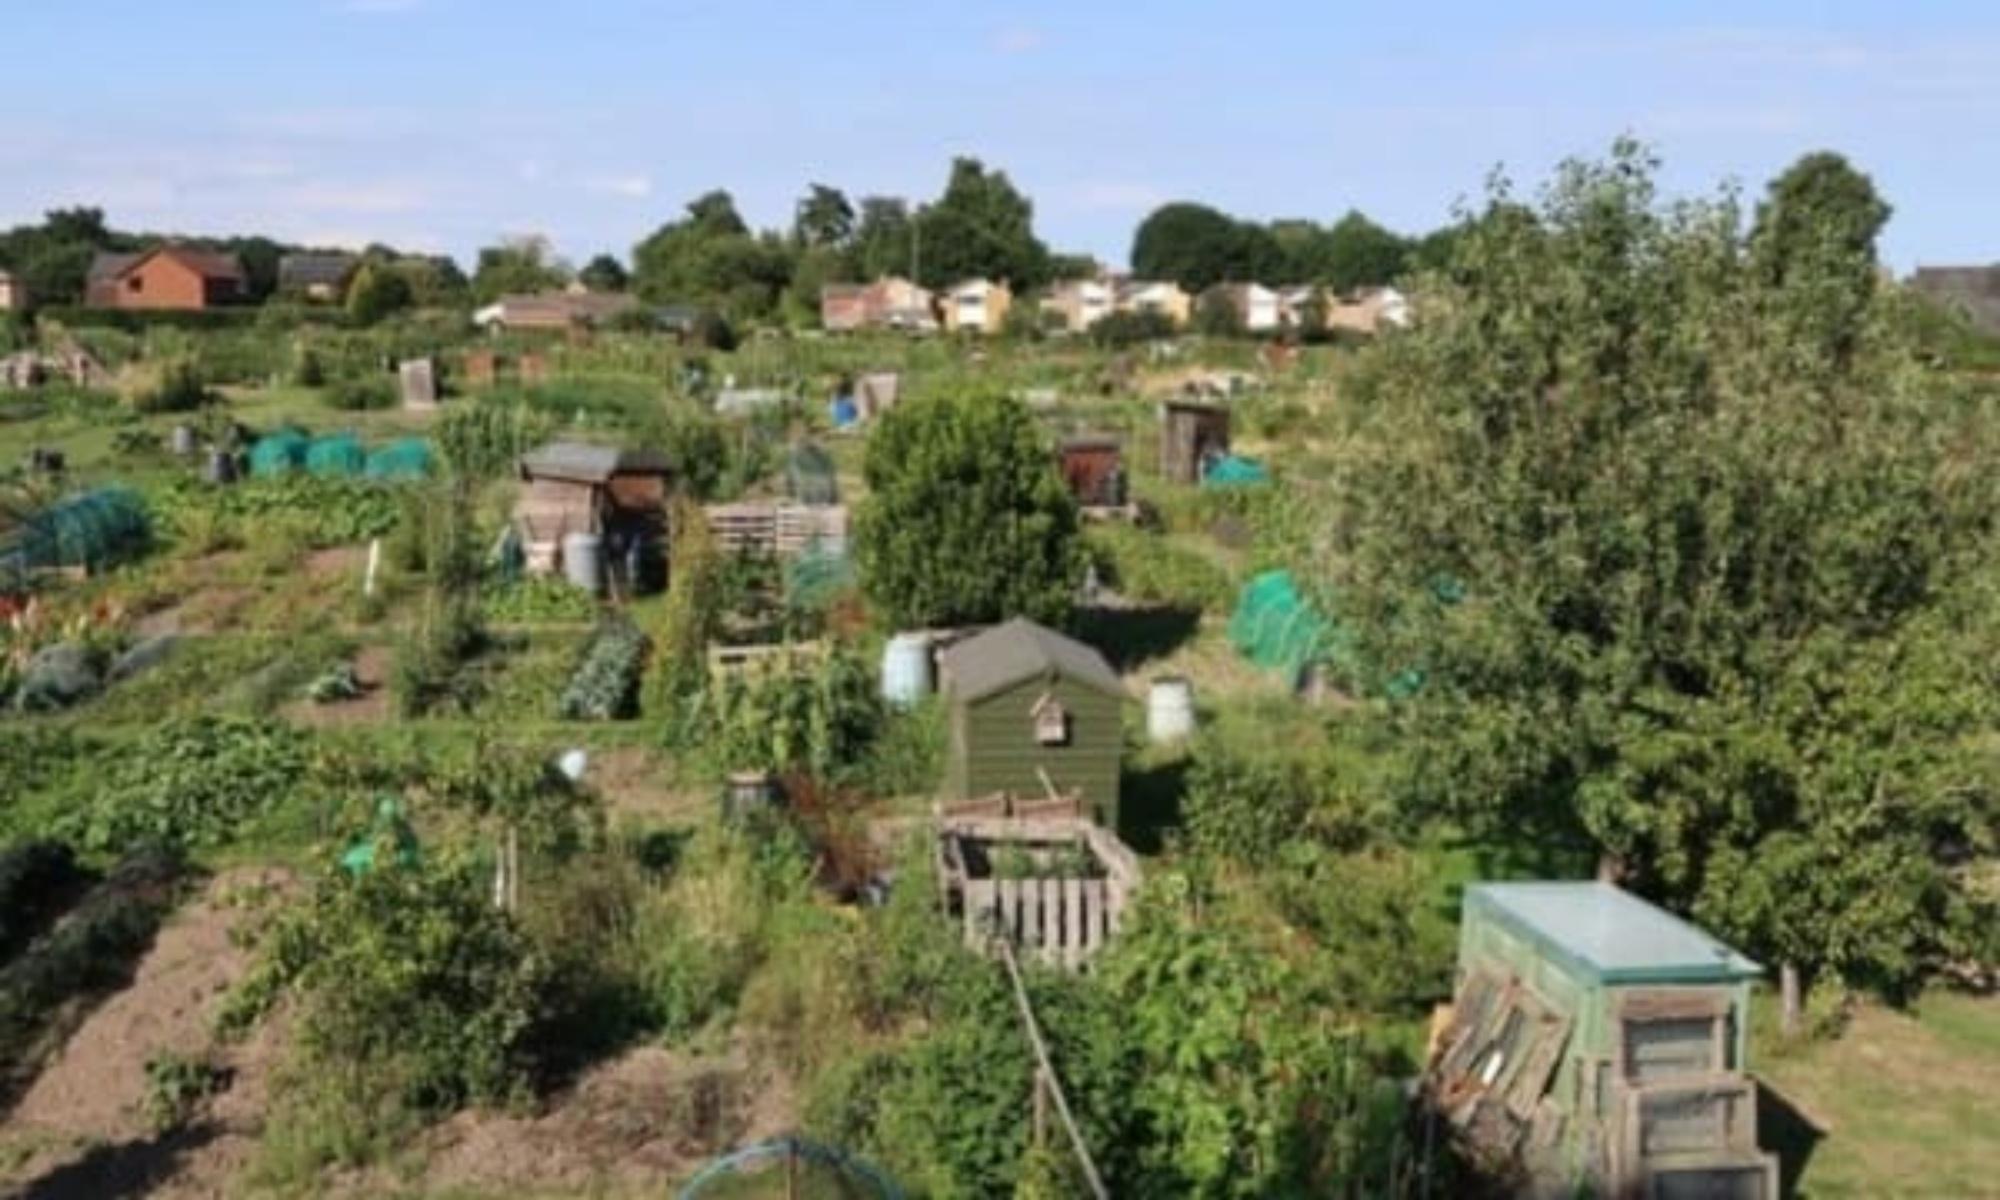 The allotments